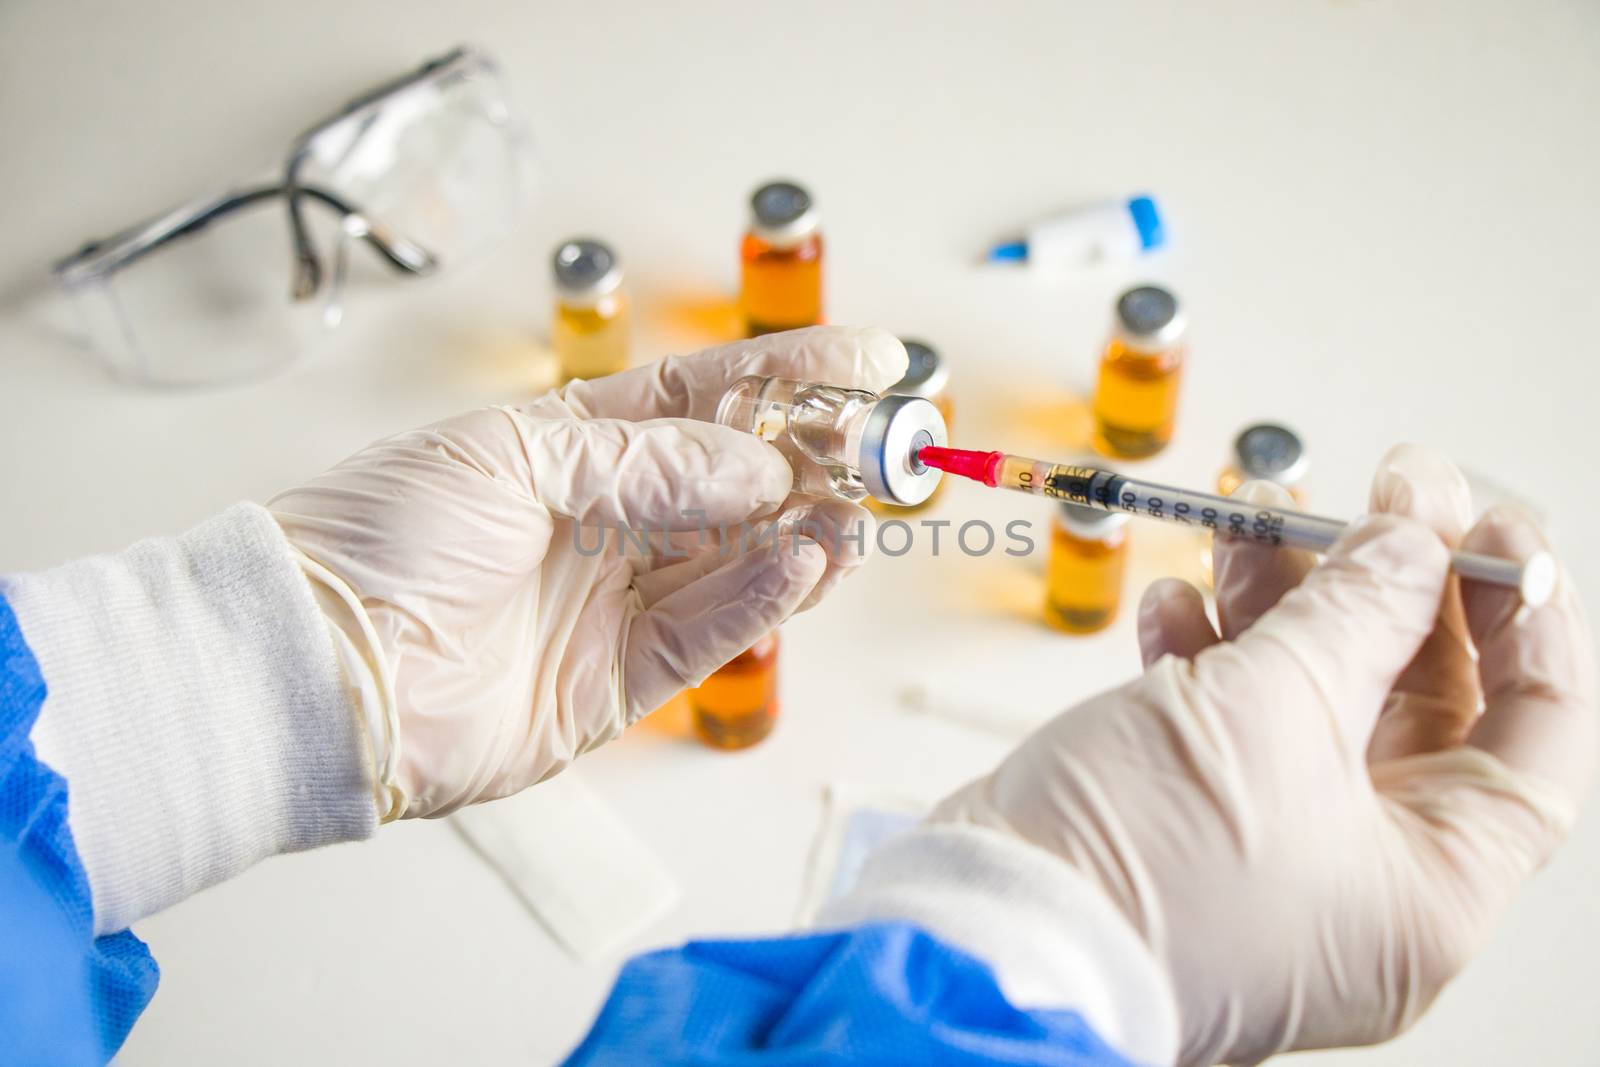 Corona virus and Covid - 19 new vaccine in ampules and bottles, needle and doctors hands with glove.